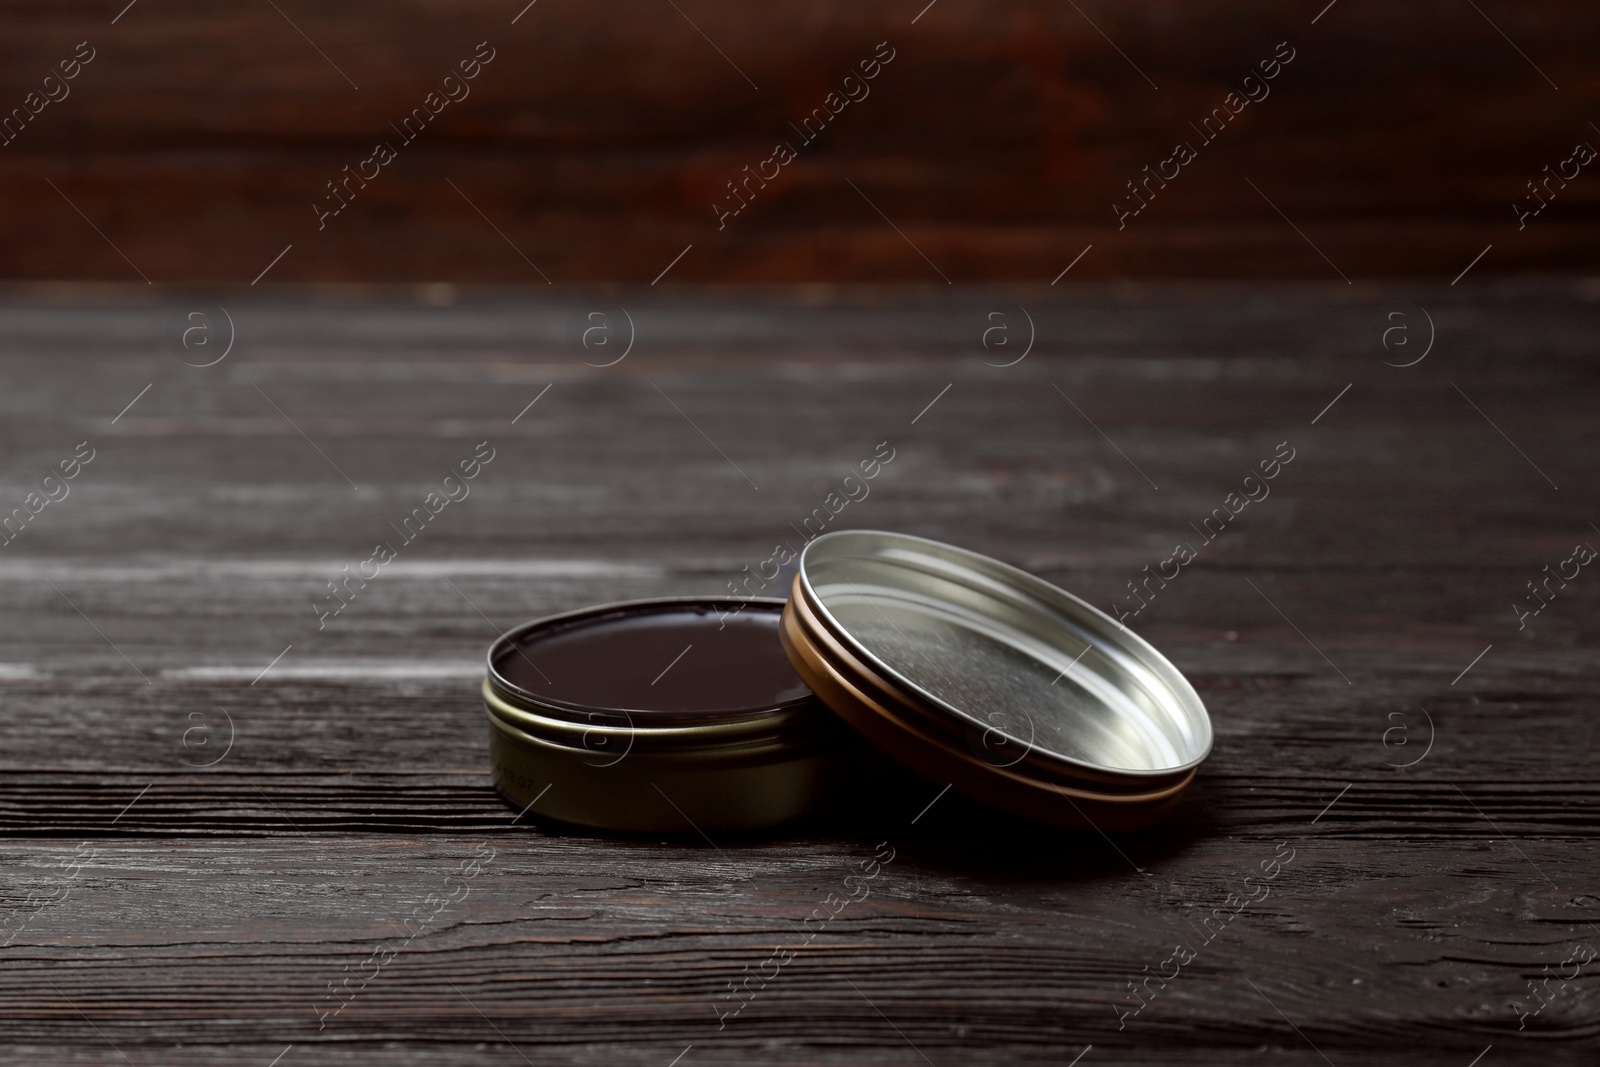 Photo of Can of black shoe polish on wooden table. Footwear care item